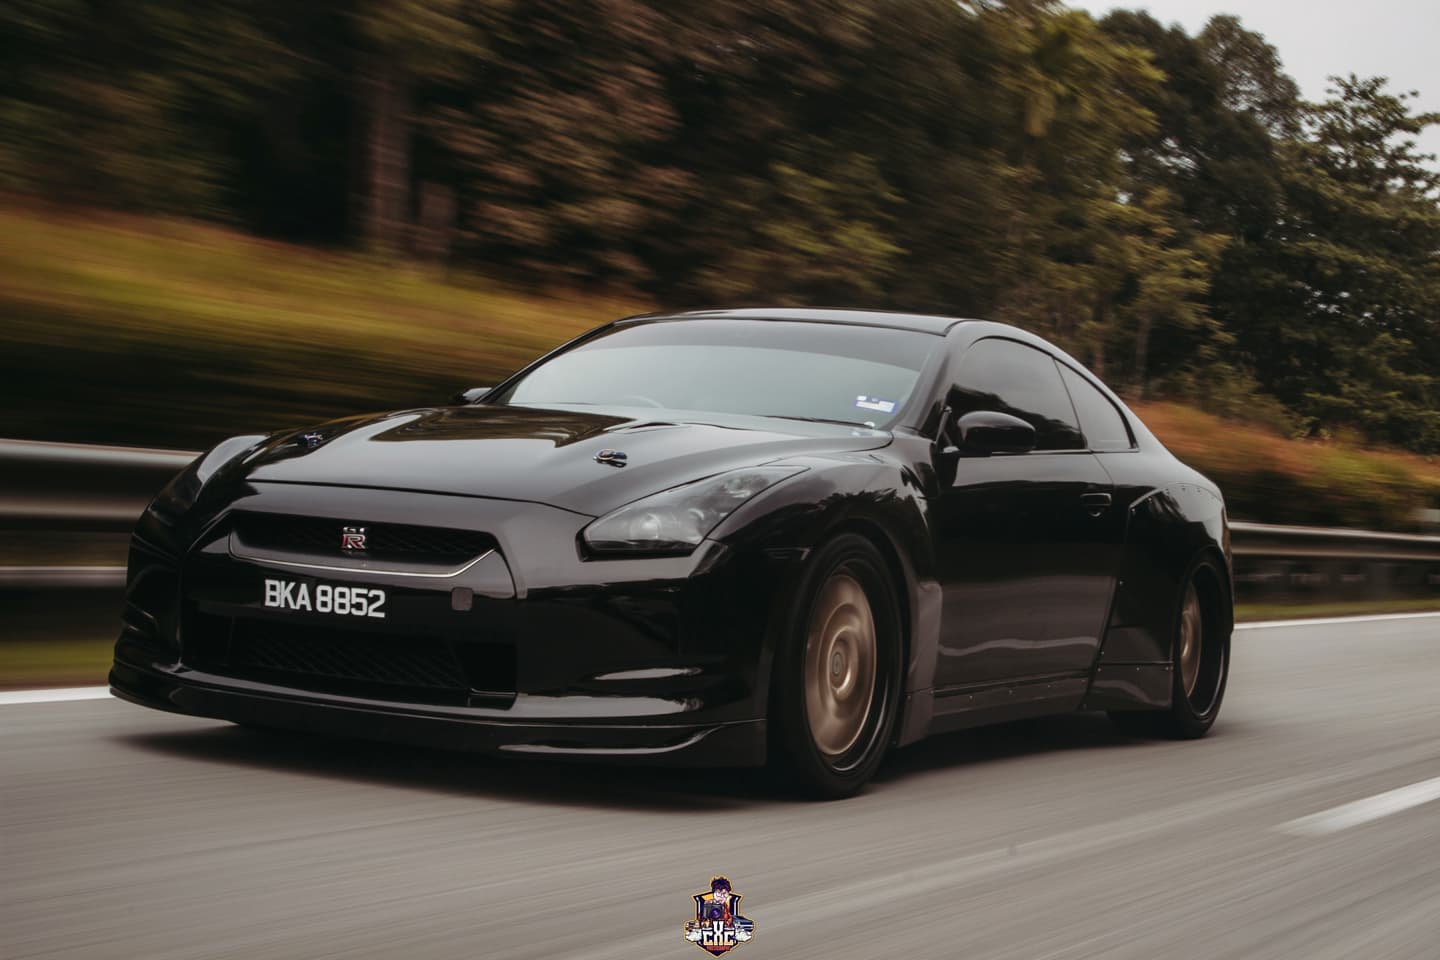 This Infiniti G35 Coupe Wears A Nissan Skyline GTR Face front - Auto Recent